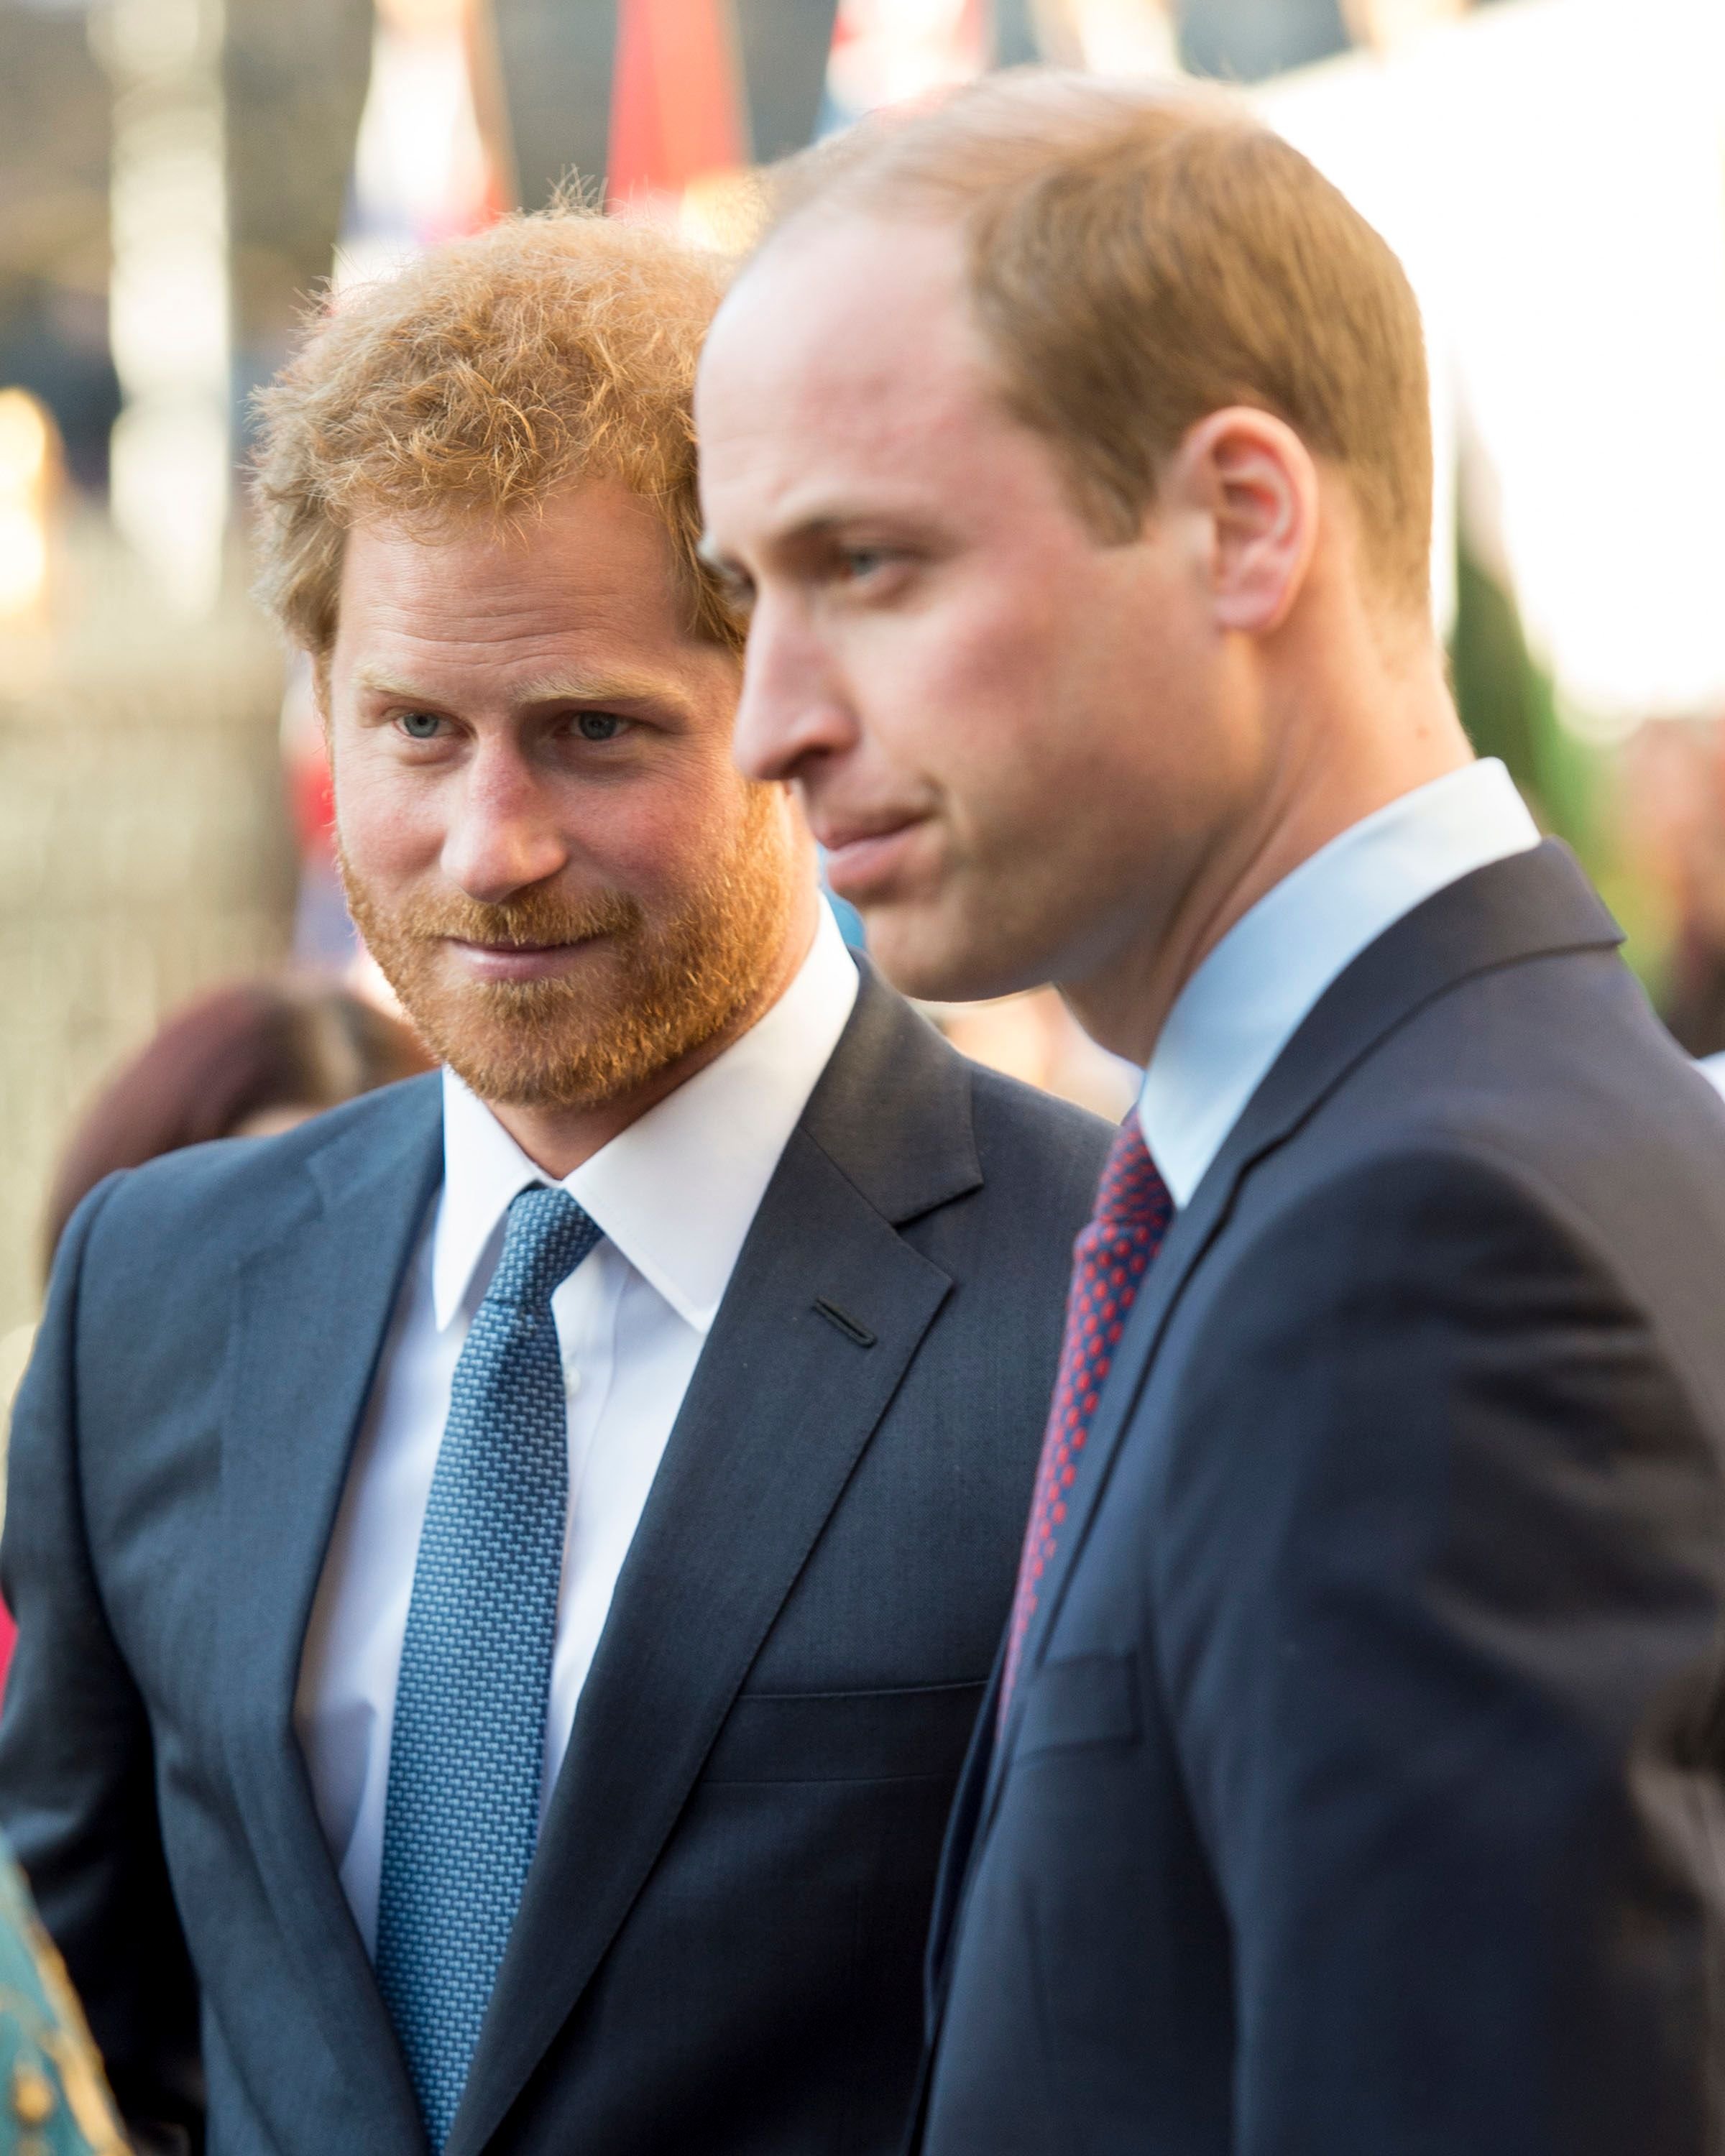 Prince Harry and Prince William at the Commonwealth Observance Day Service on March 14, 2016. | Photo: Getty Images